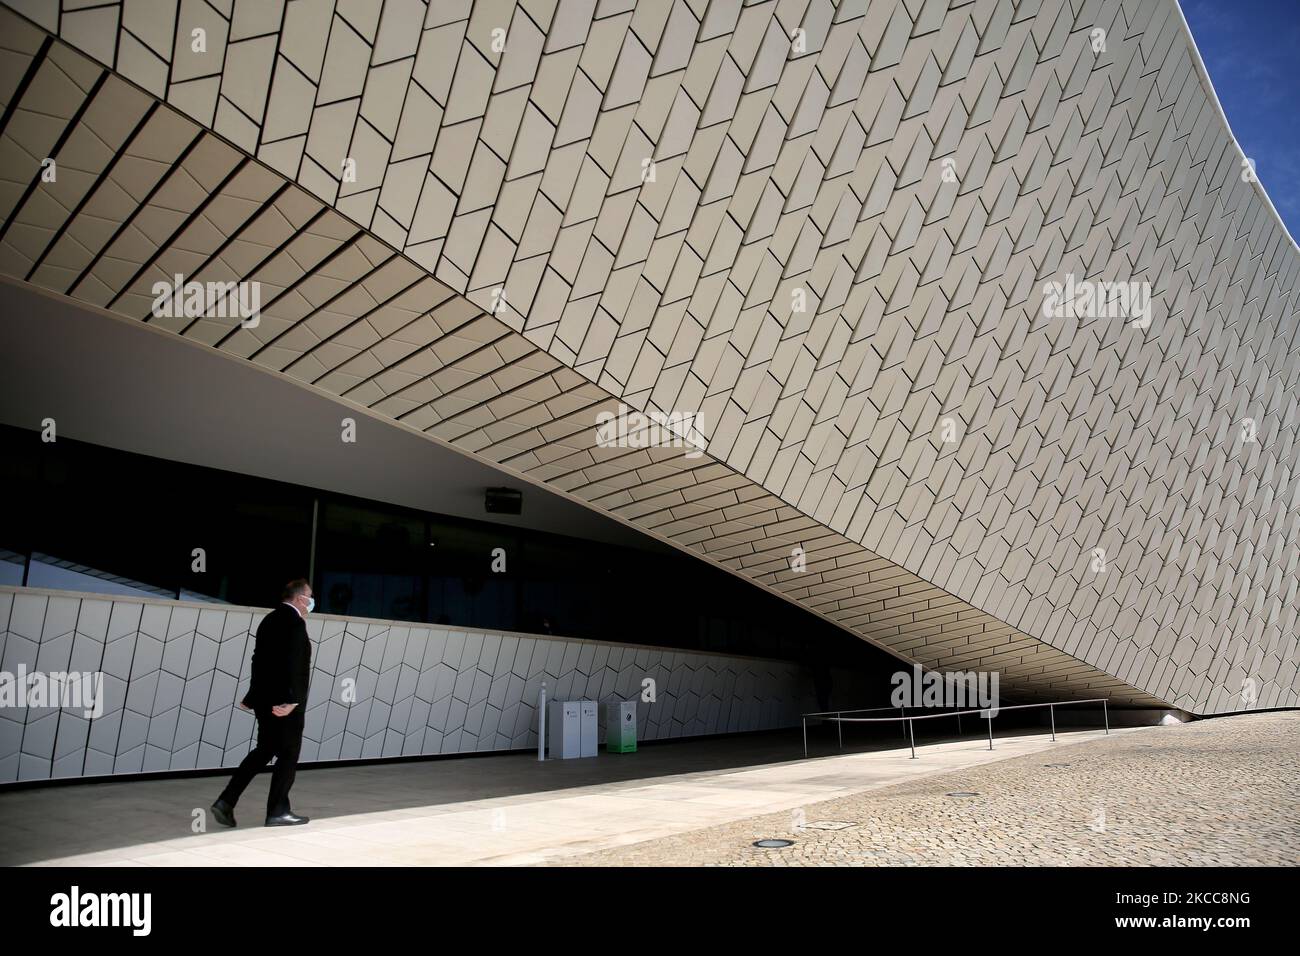 A man wearing a face mask enters the reopened Museum of Art, Architecture and Technology (MAAT) in Lisbon, Portugal, on April 5, 2021. Portugal started on April 5, the second phase of lifting COVID-19 restrictions, with the reopening of cafes and restaurants terraces, museums, monuments, gyms, shops up to 200 square meters, and the return to classes of students from the 5th to the 9th grade, nearly two months after tightening Covid-19 curbs following a wave of cases early this year. (Photo by Pedro FiÃºza/NurPhoto) Stock Photo